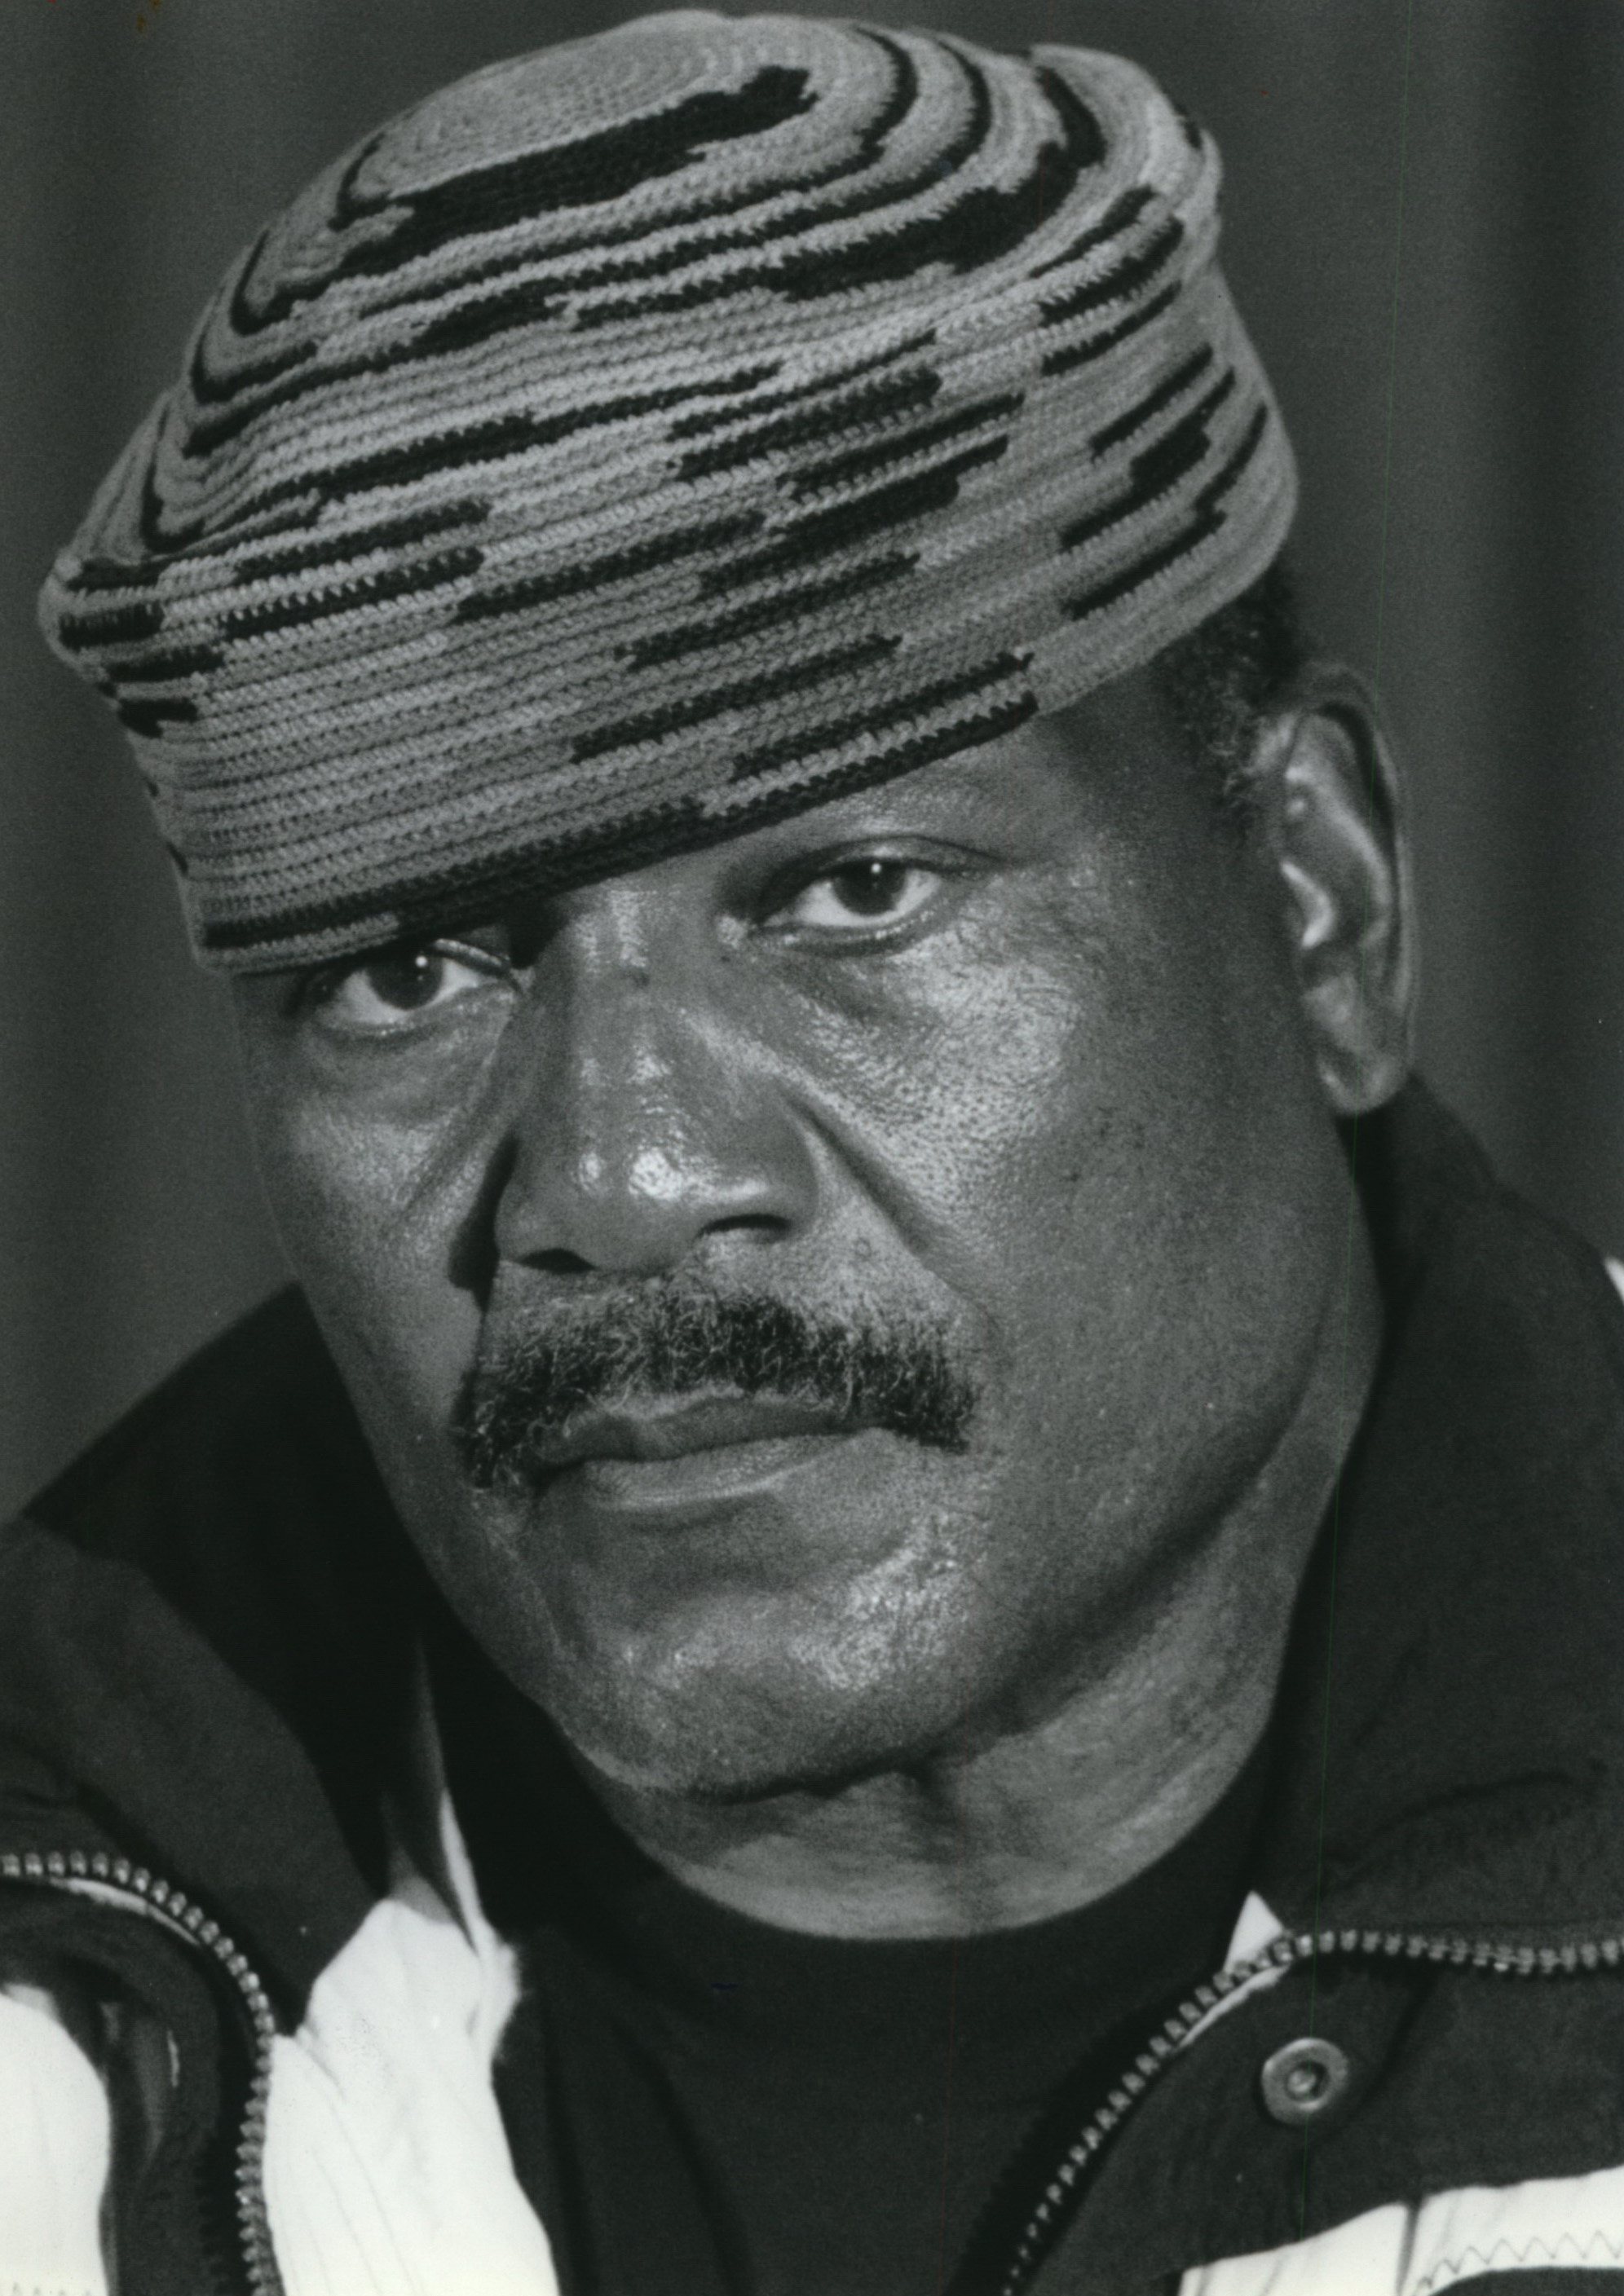 Jim Brown at the Syracuse University sports roundtable discussion at the Manley Field House in 1992.